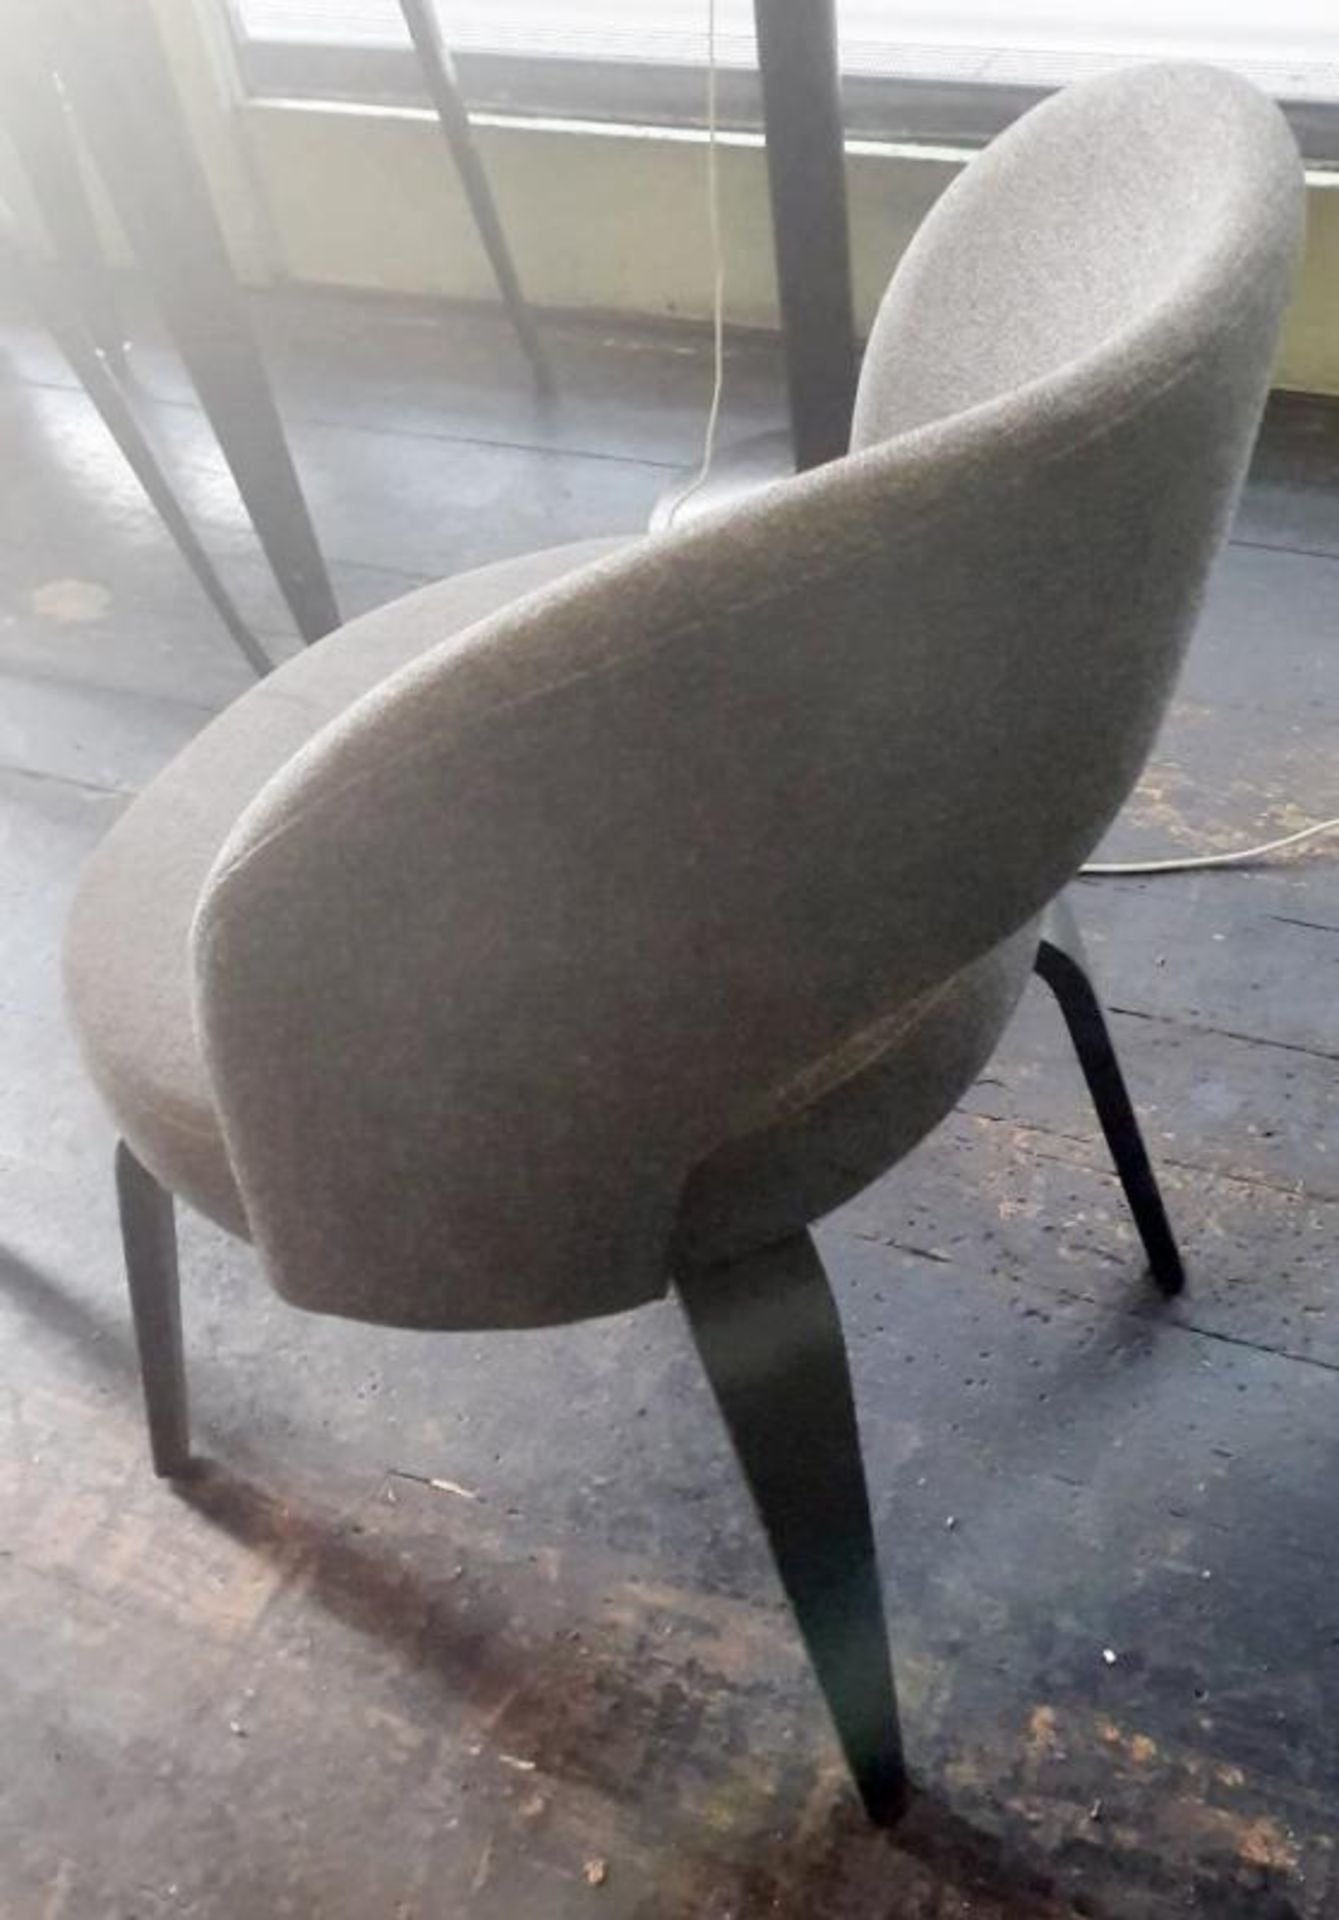 1 x Stylish Chair Upholstered In A Light Grey Fabric - Recently Taken From A Contemporary Caribbean - Image 2 of 6